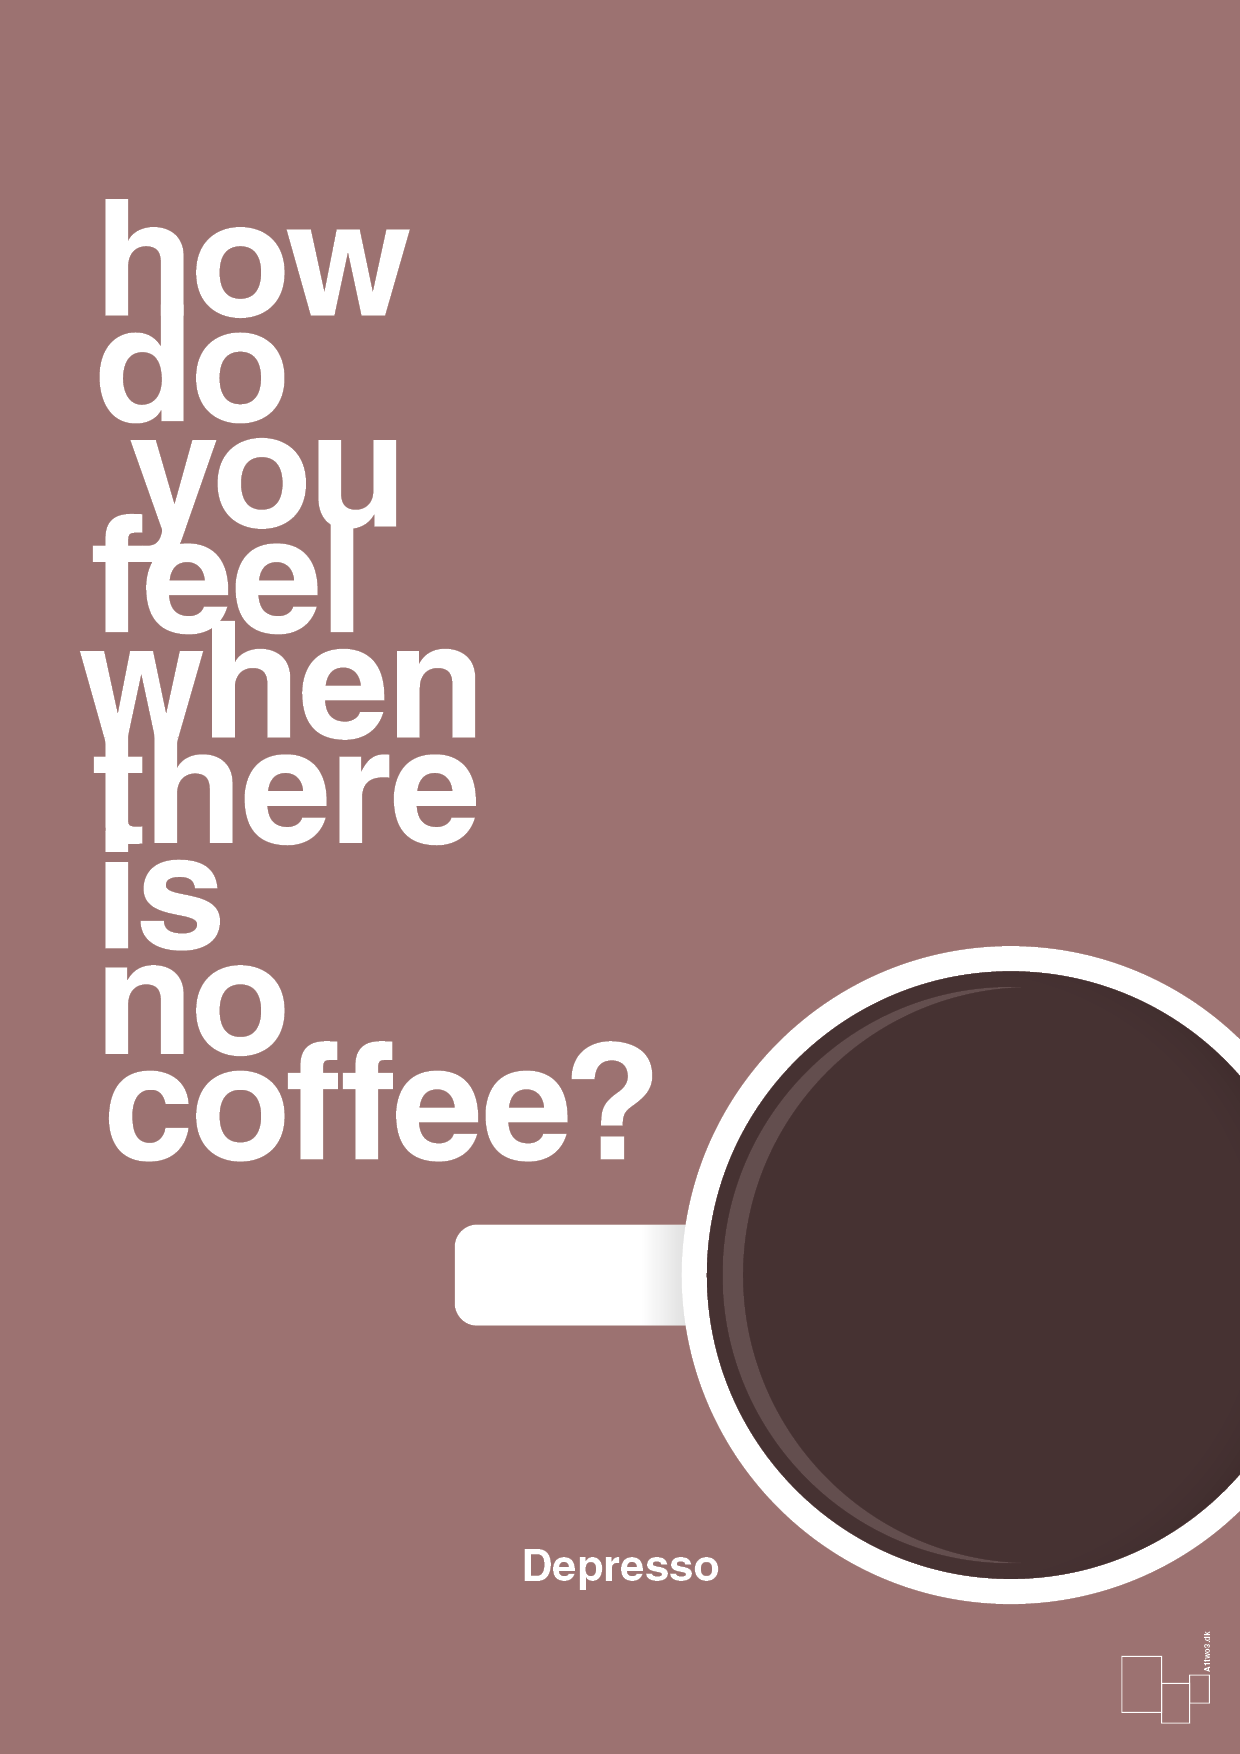 how do you feel when there is no coffee? depresso - Plakat med Mad & Drikke i Plum